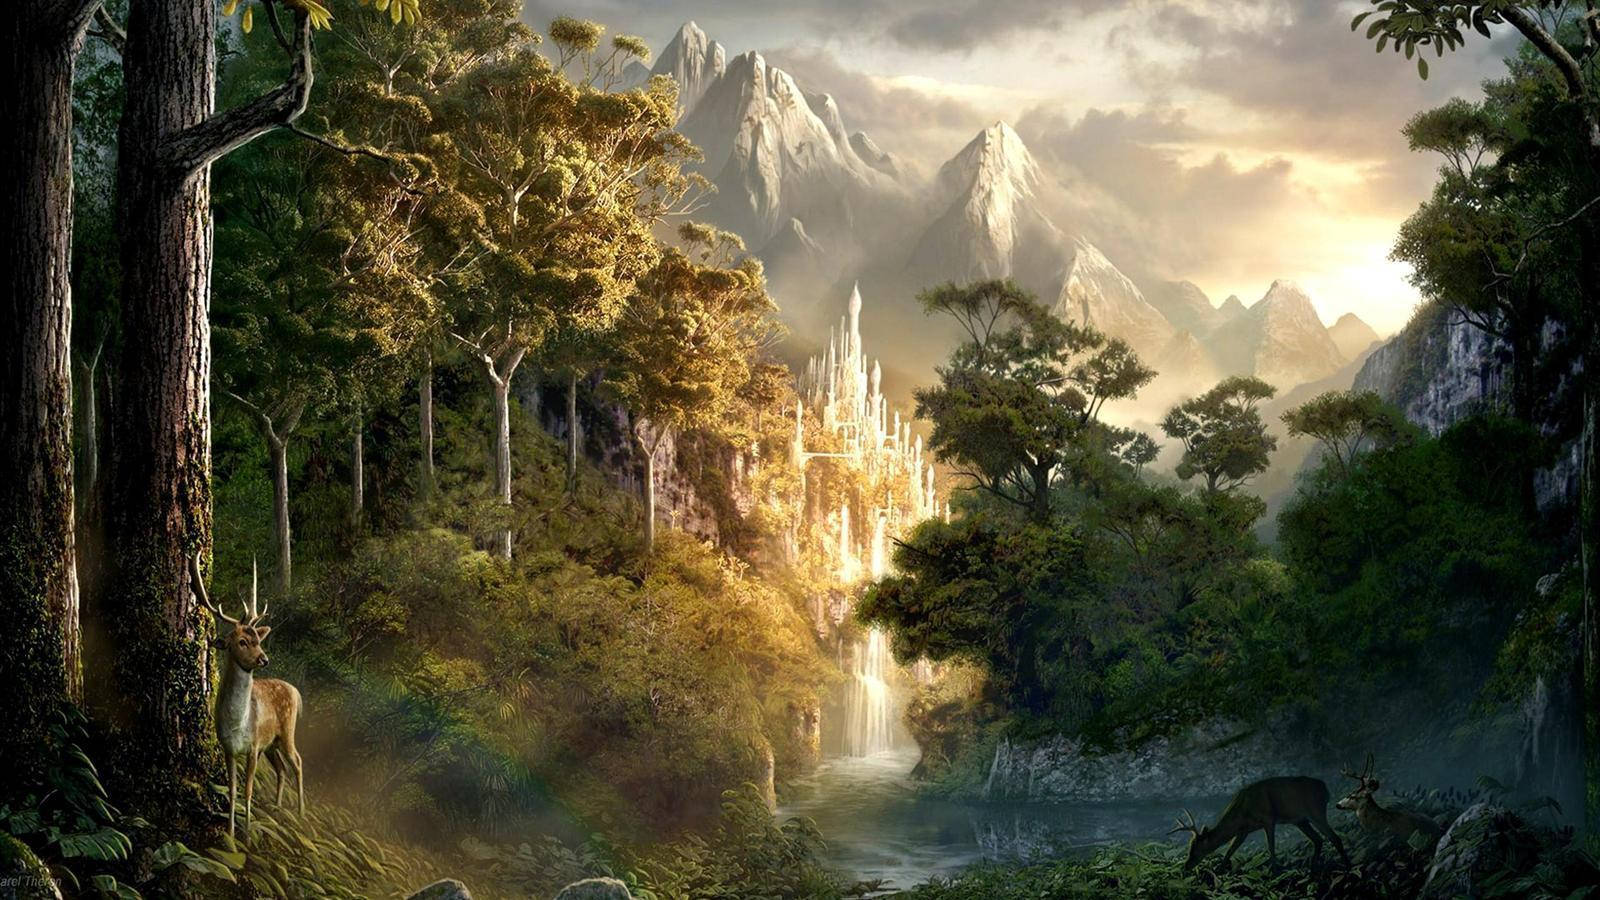 A Fantasy Scene With A Waterfall And Trees